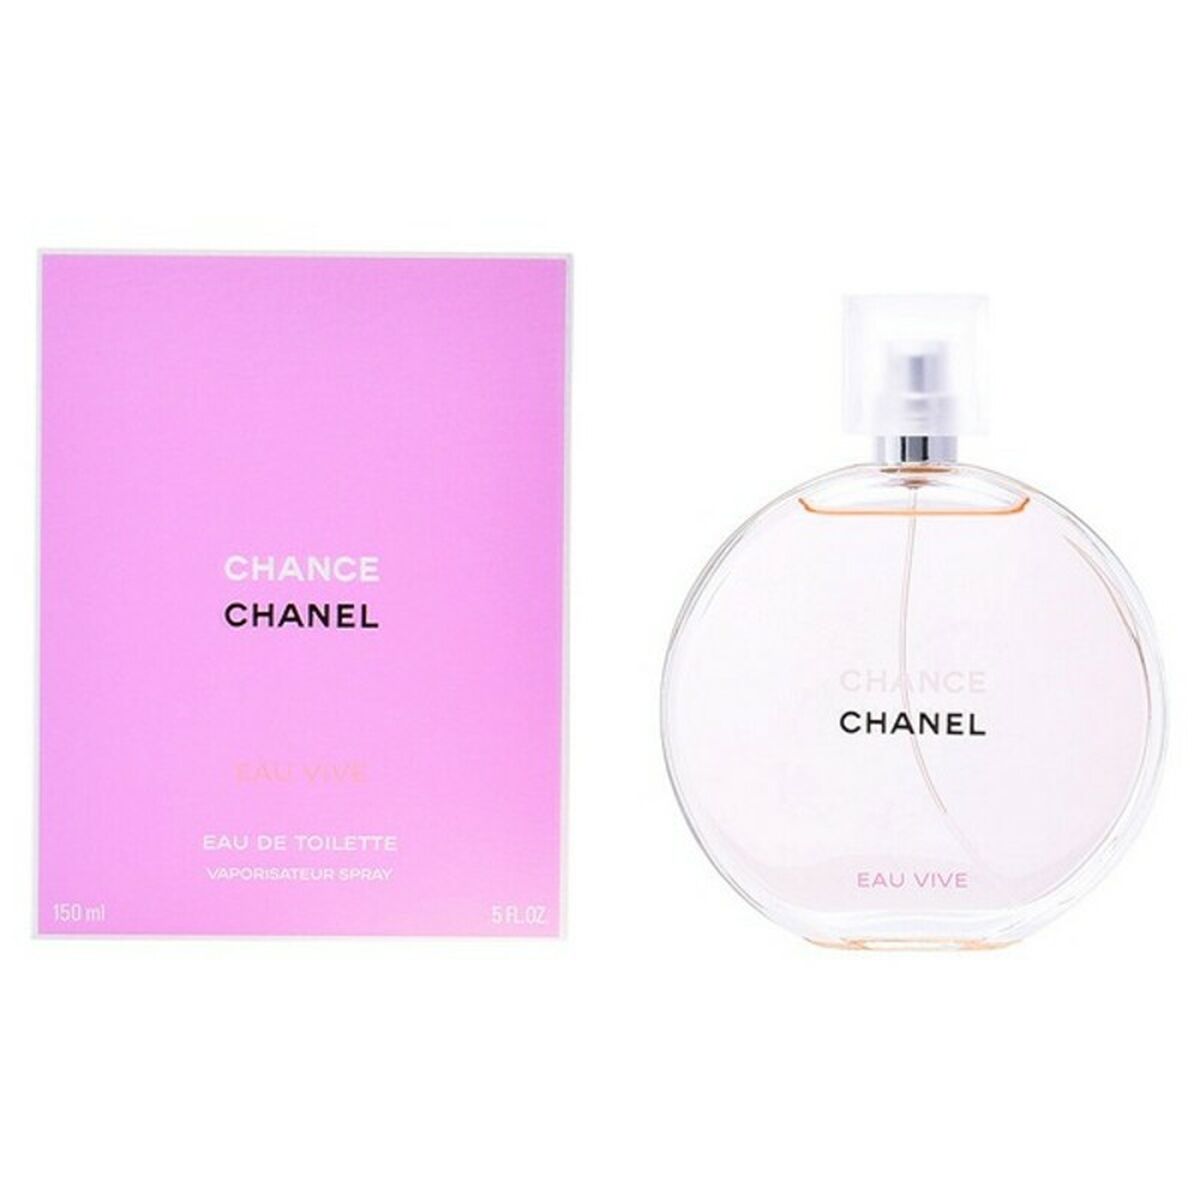 Chanel Chance Black Friday Deals